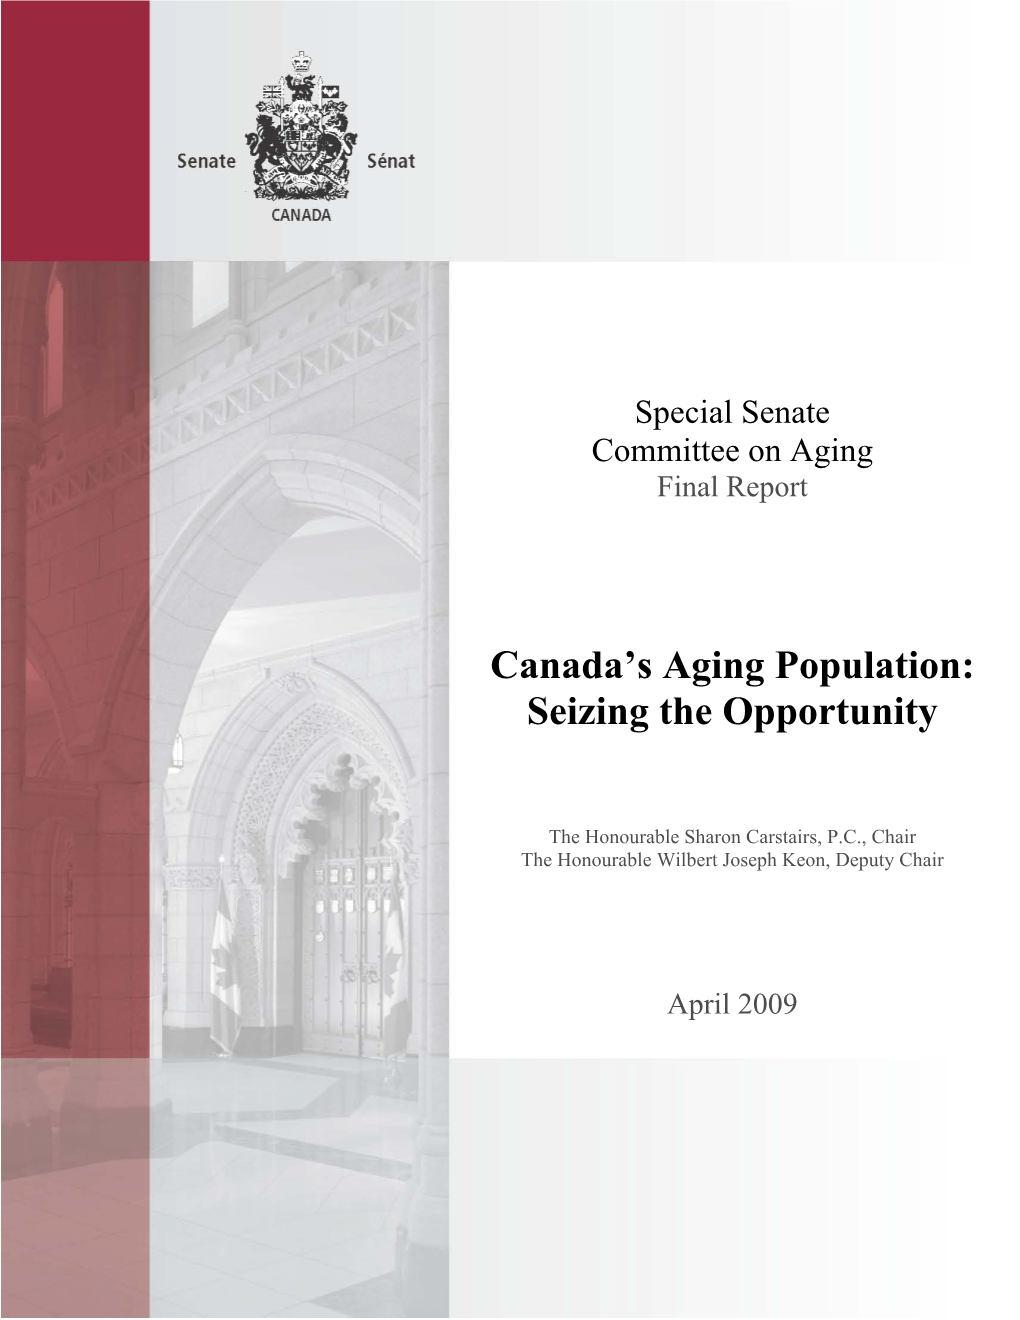 Canada's Aging Population: Seizing the Opportunity